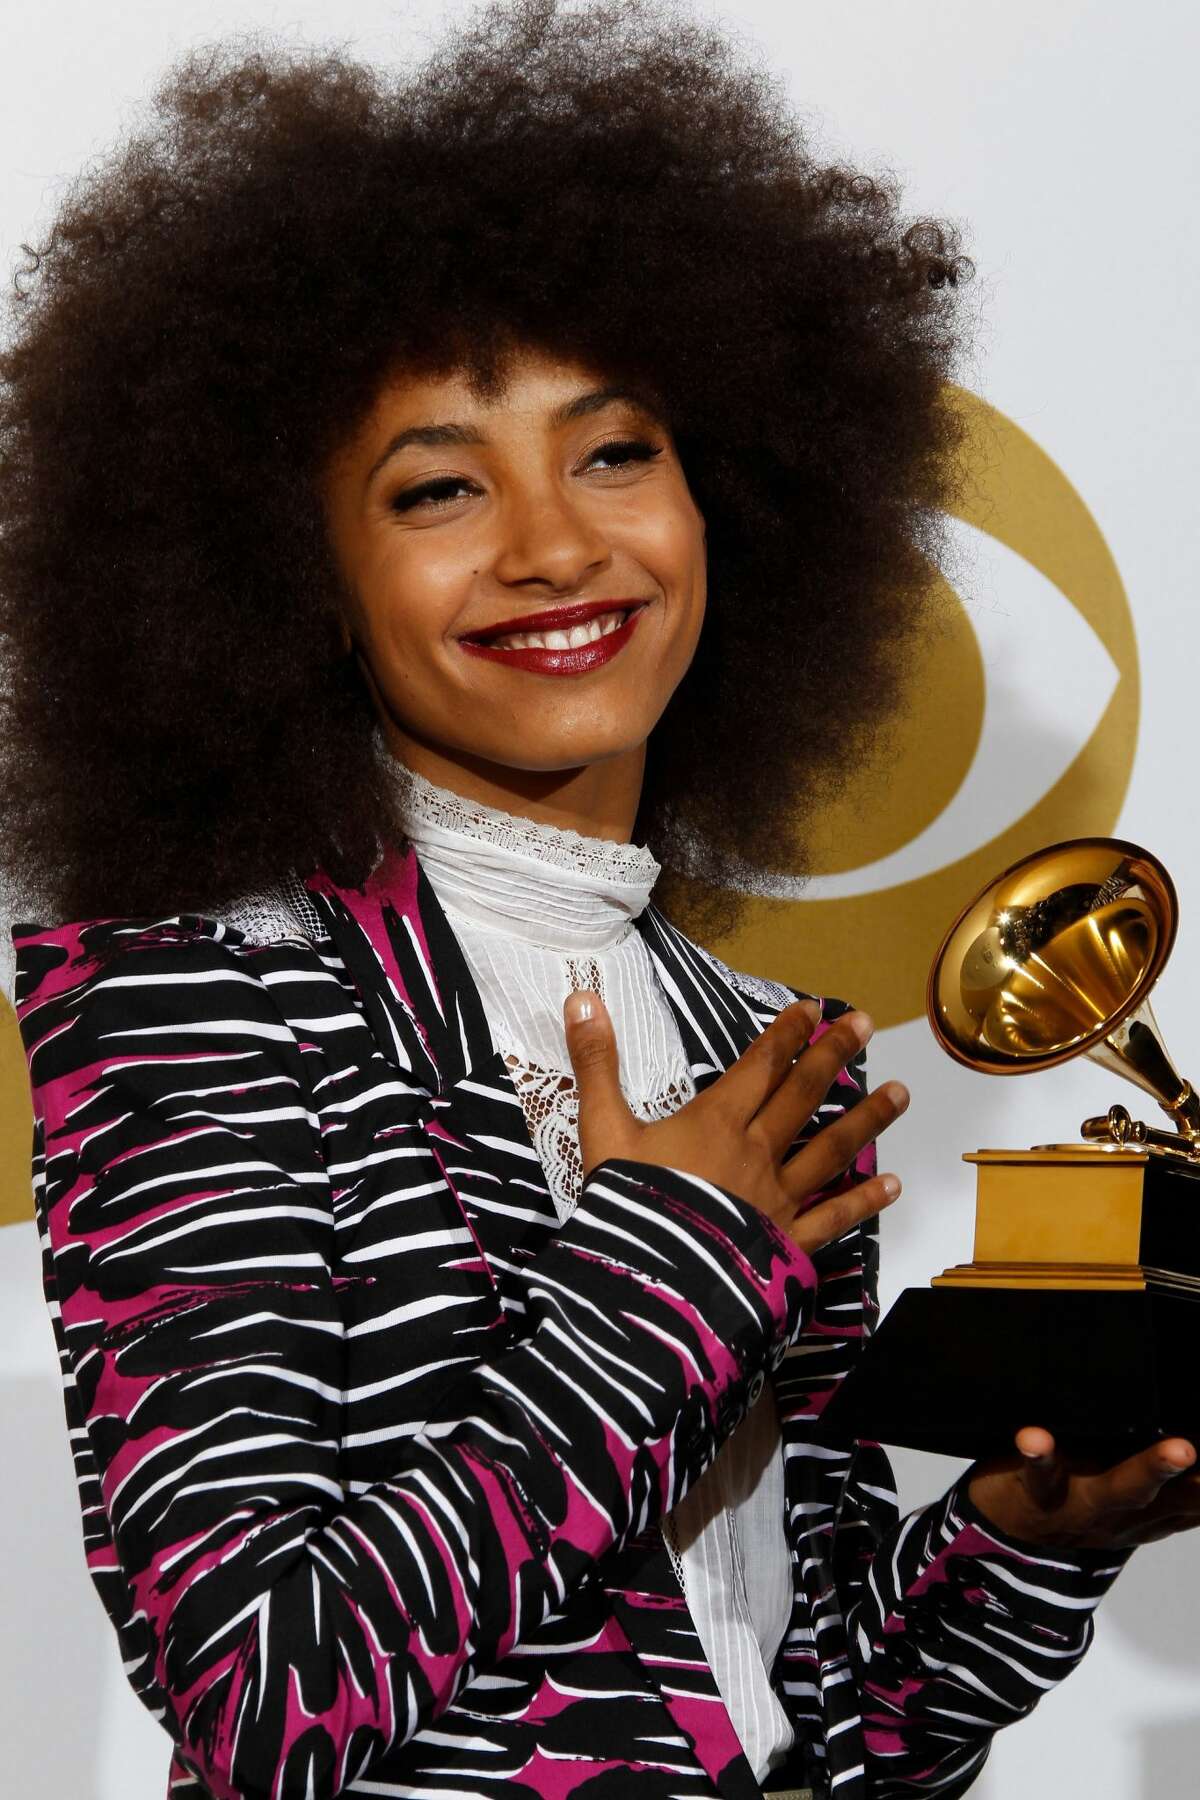 Throwback Past Grammy winners for 'Best New Artist' and where they are now